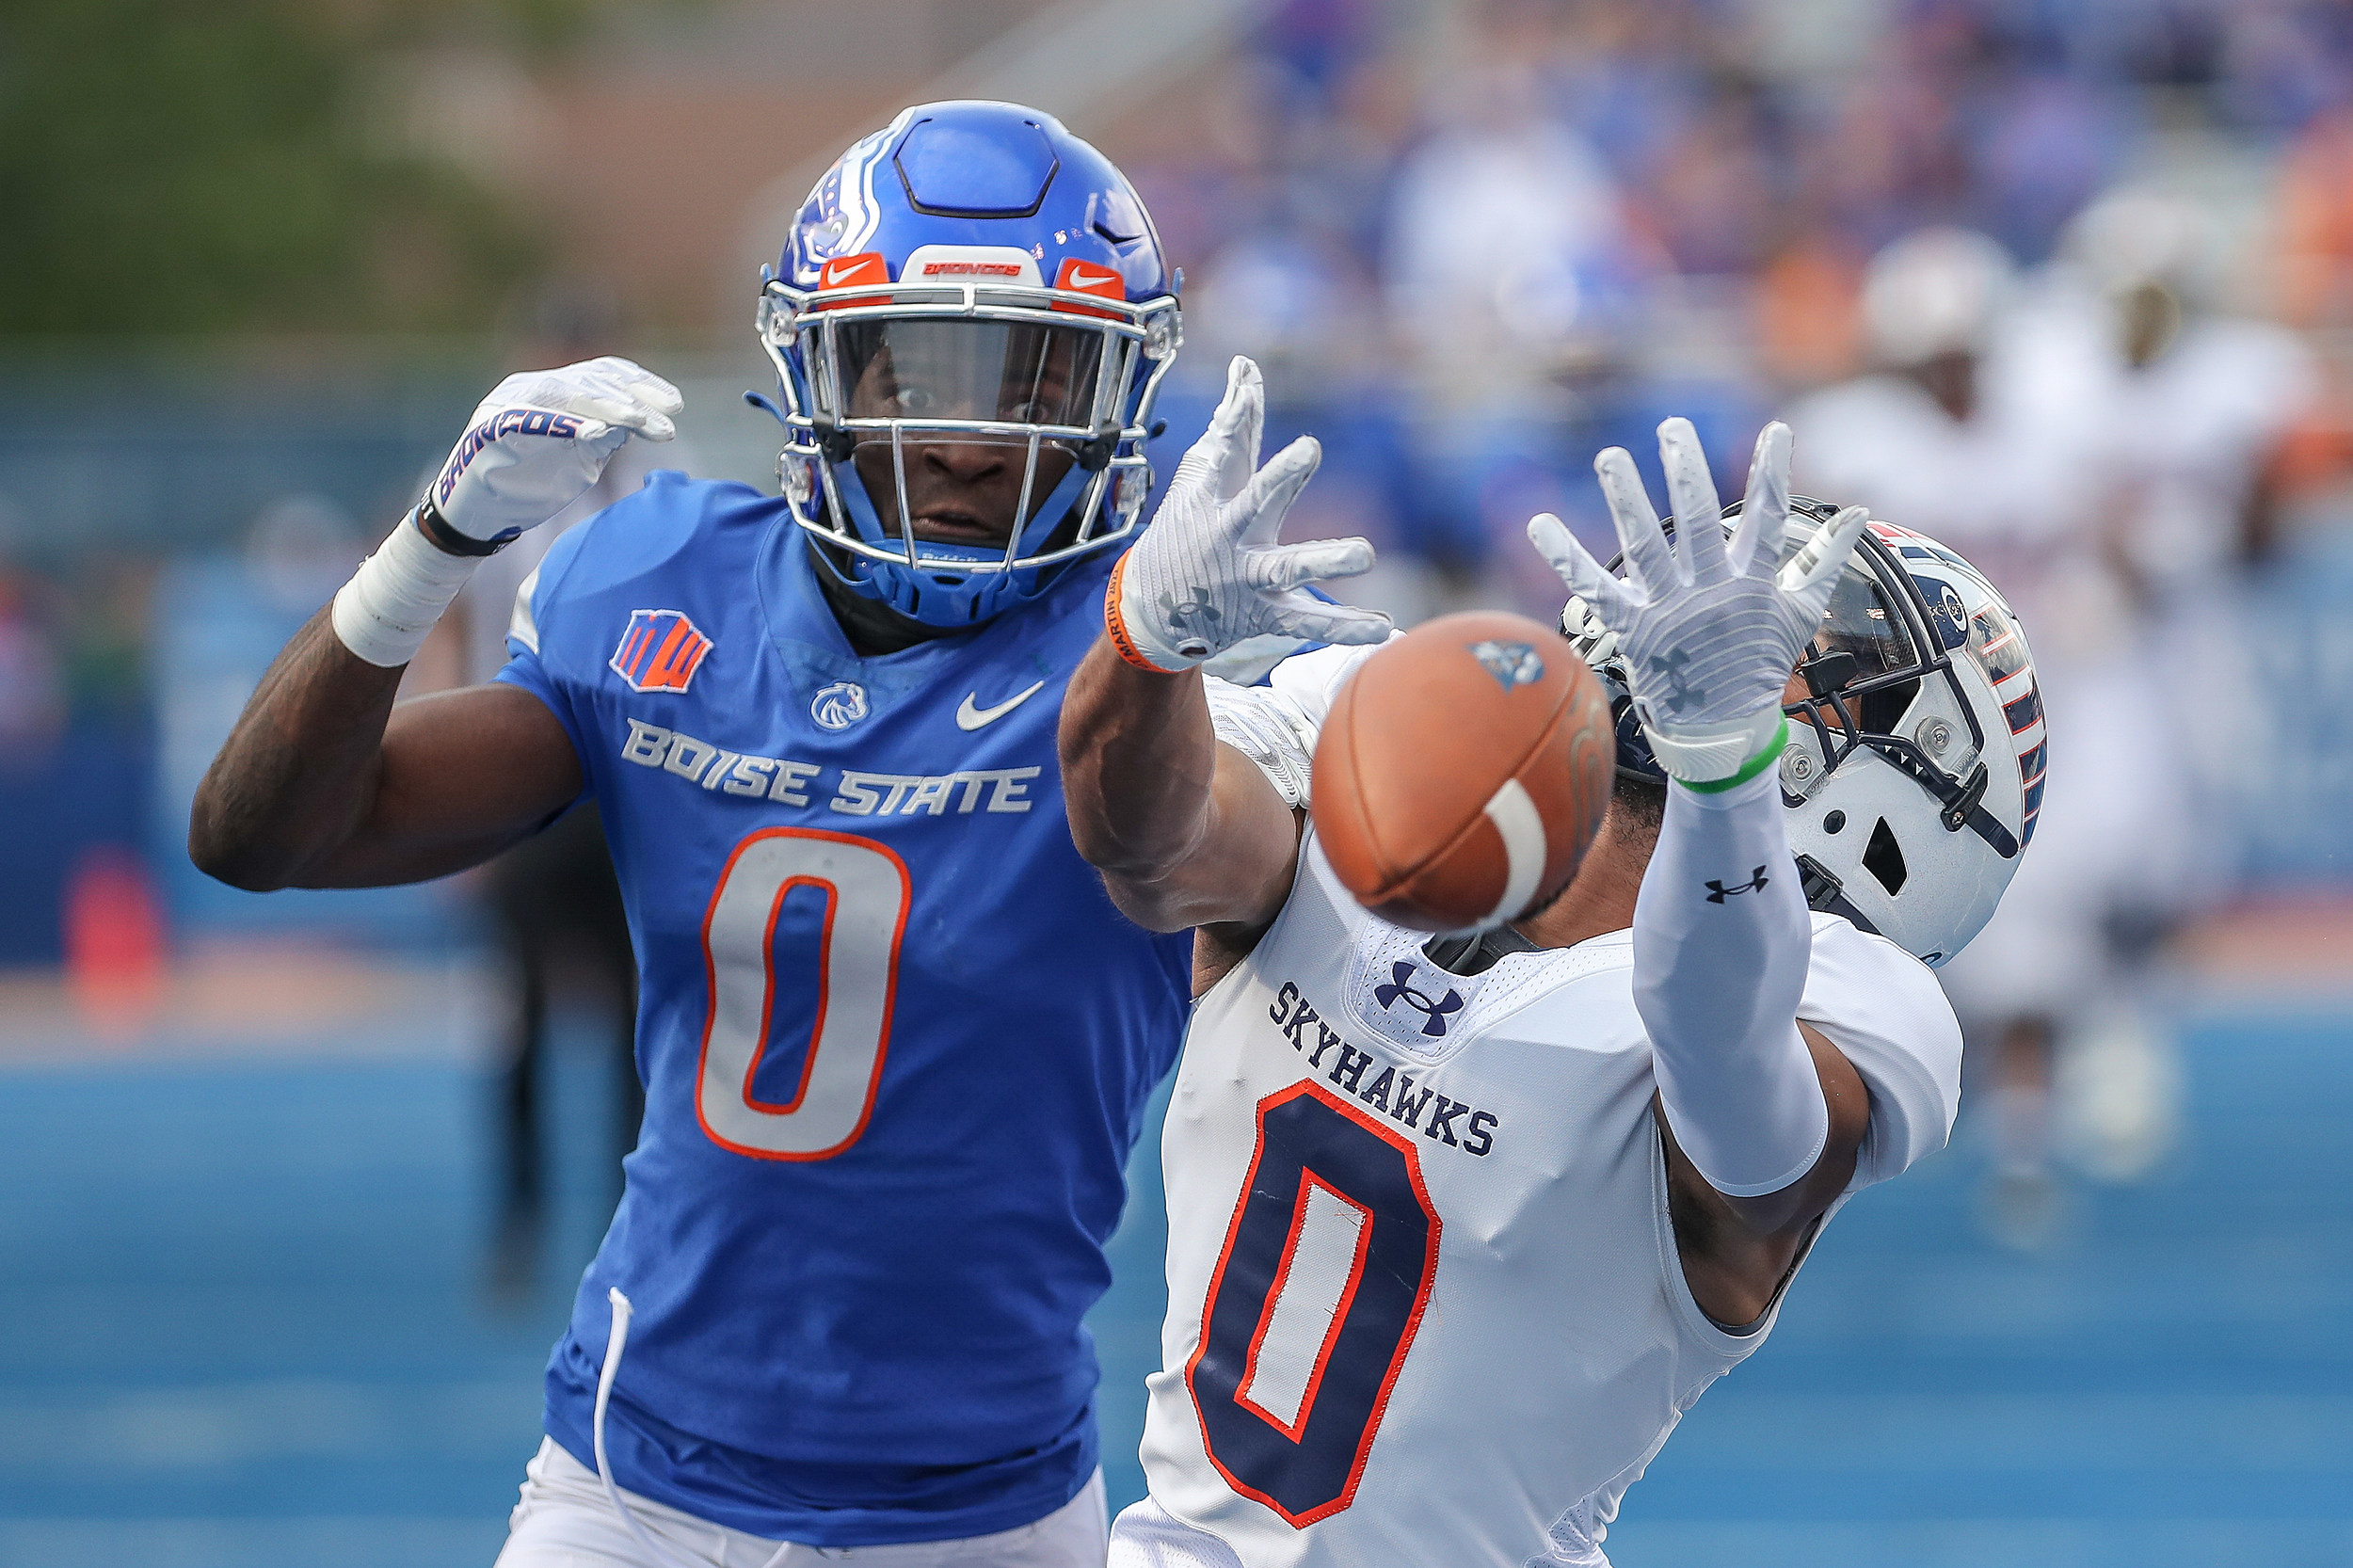 Boise State unable to hang on after late touchdown, as UCF walks